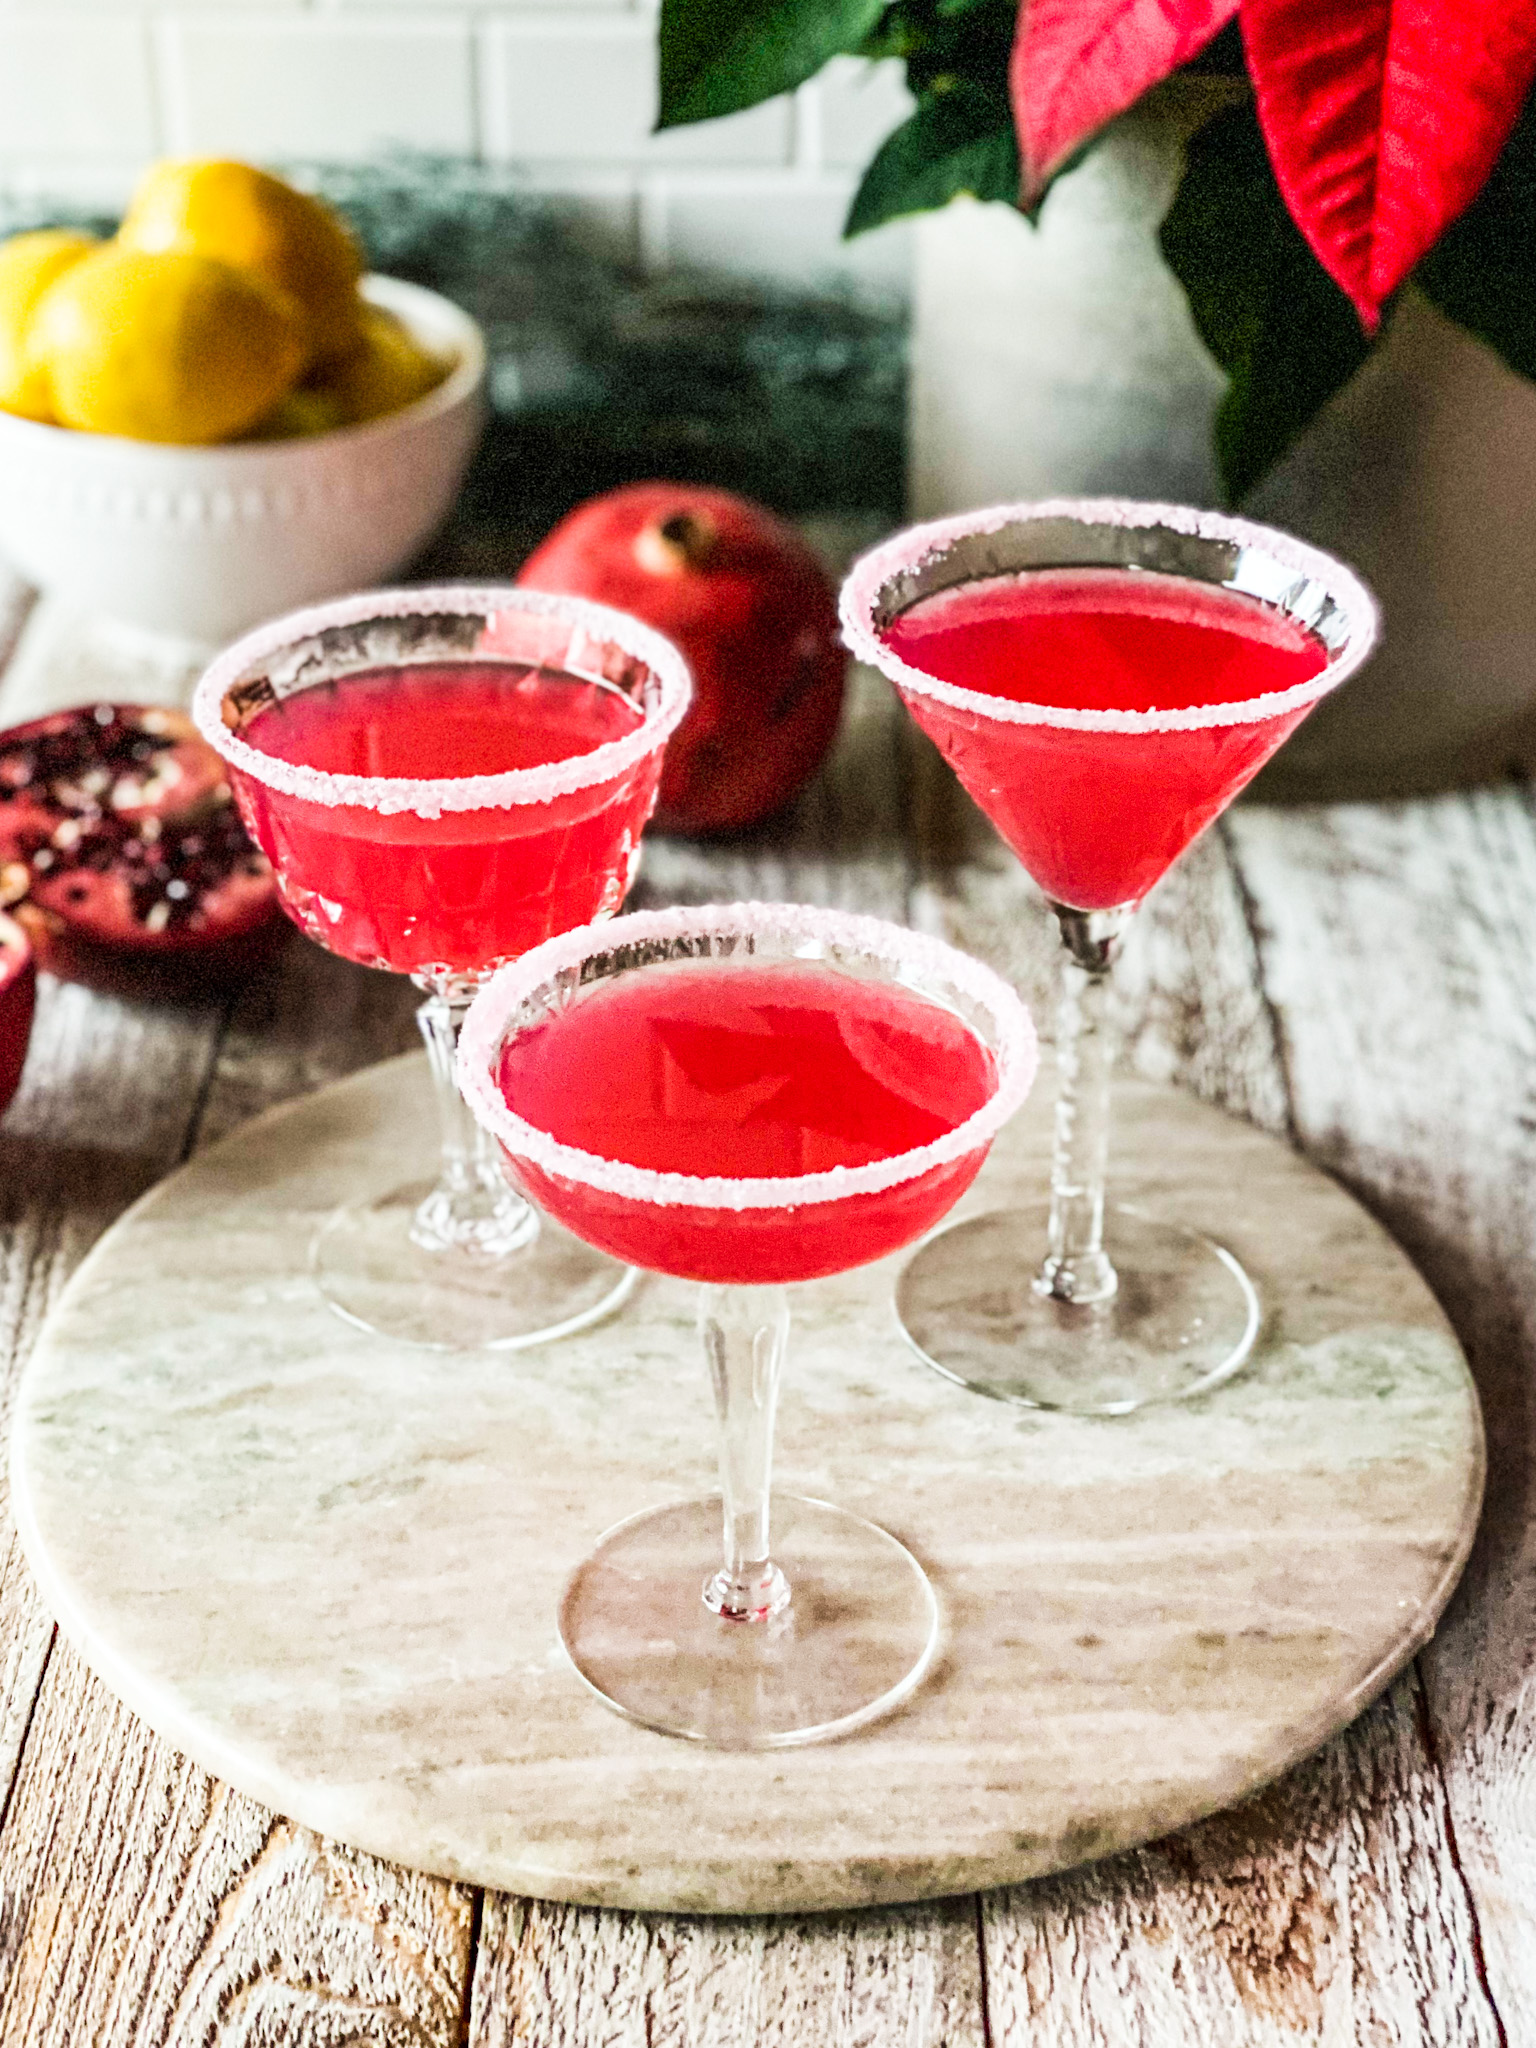 Pomegranate Lemon Drop Martini - The Perks of Being Us